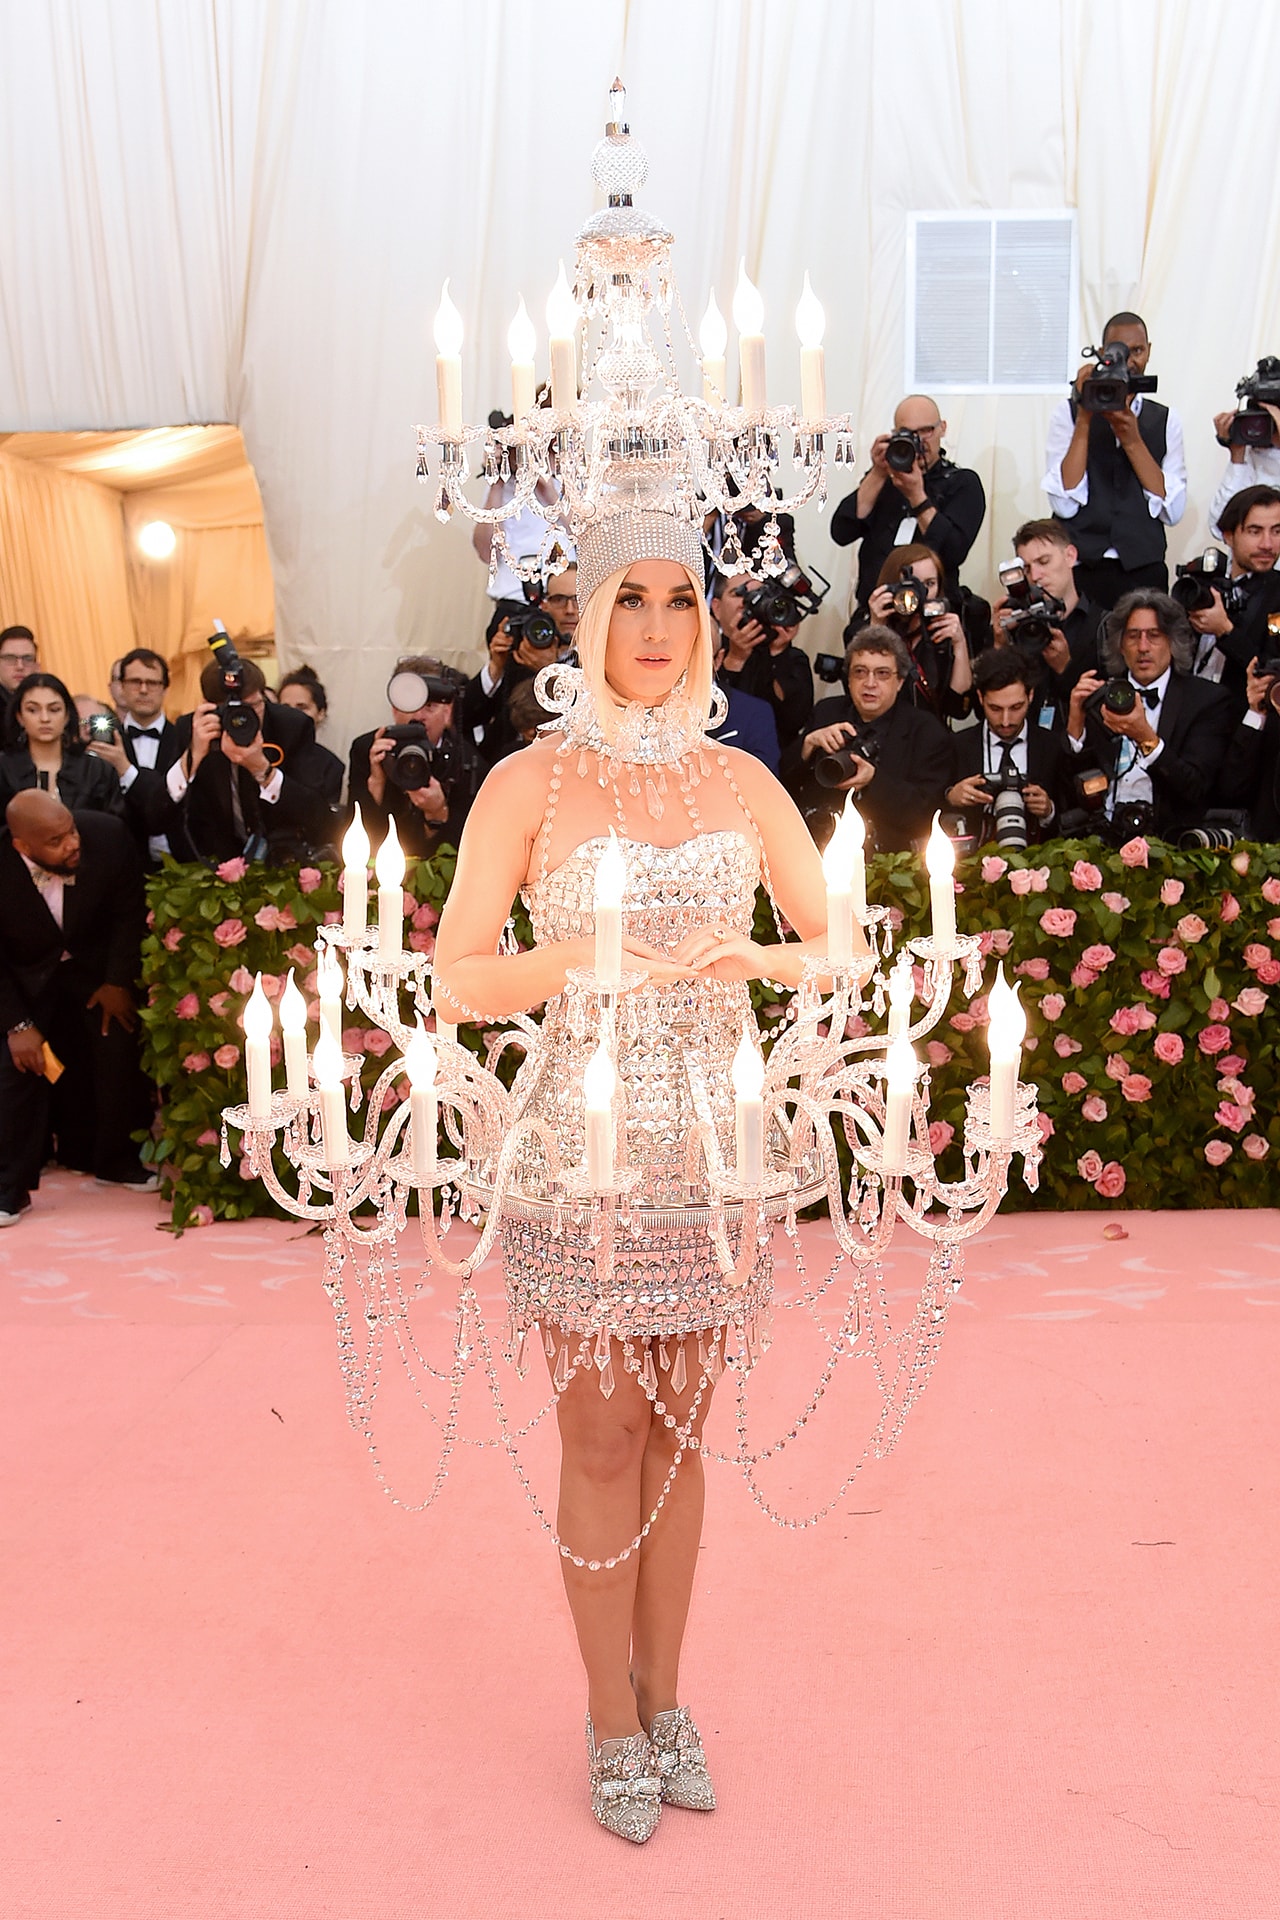 Katy Perry Chandelier Met Gala 2019 Red Carpet Camp Notes on Fashion